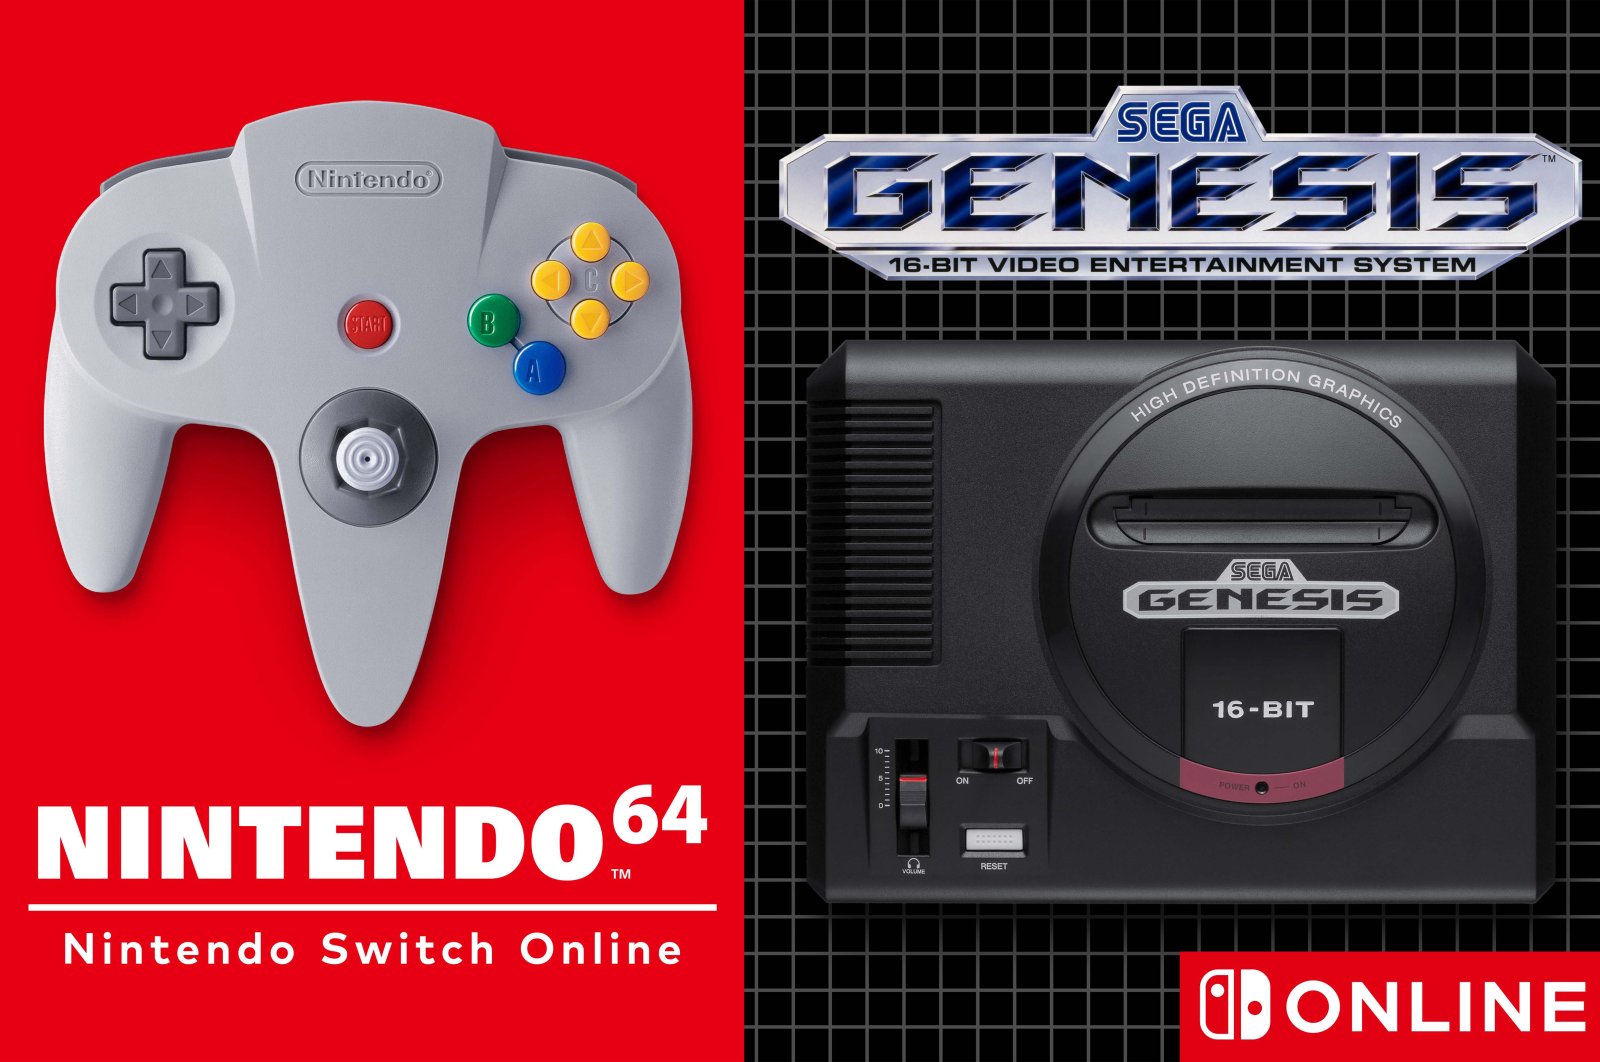 The promotional poster for the upcoming Nintendo 64 and Sega Genesis Expansion Pack (Credit: Nintendo)